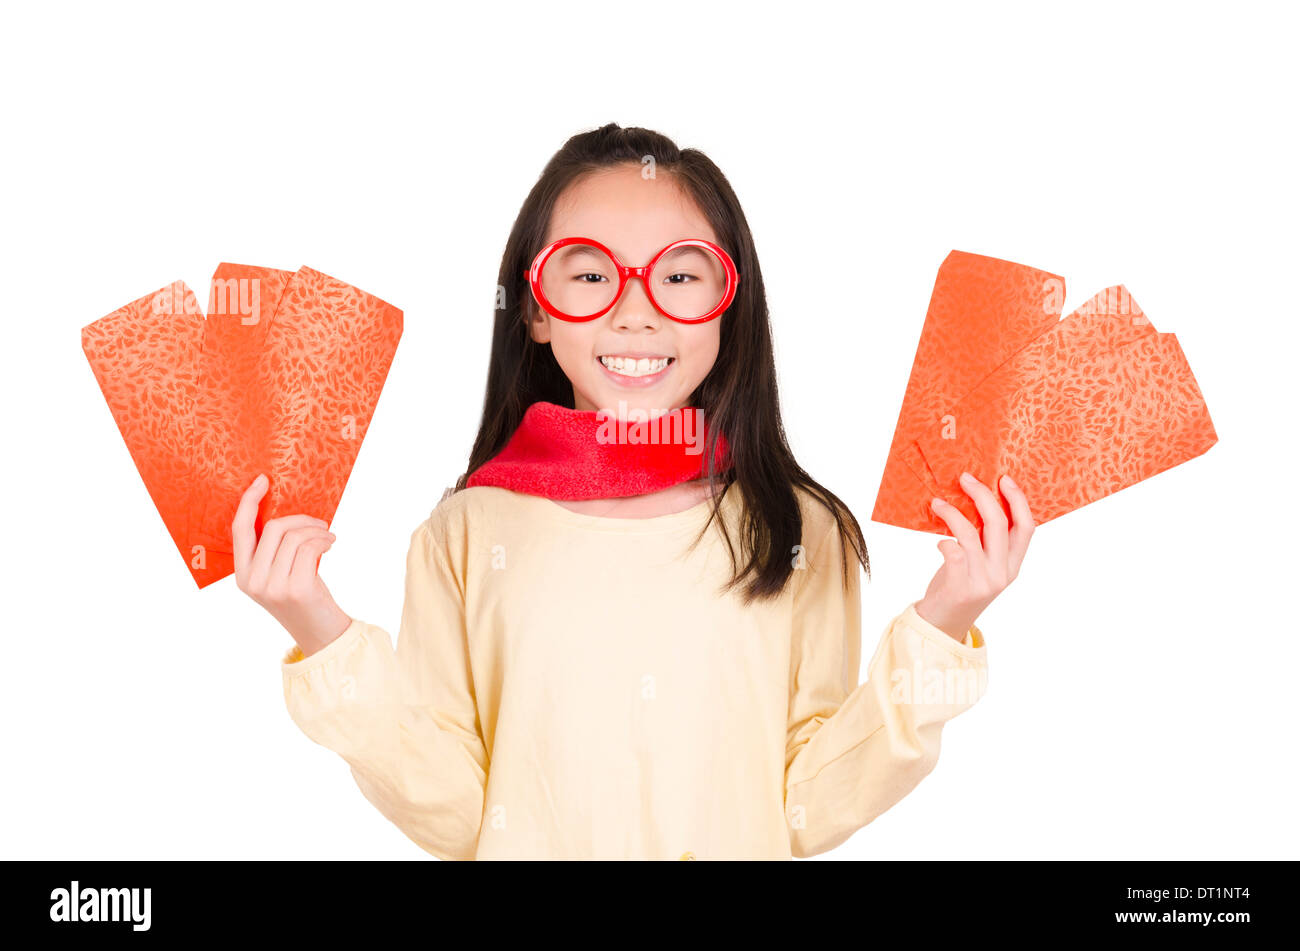 Beauty girl showing red envelope Stock Photo